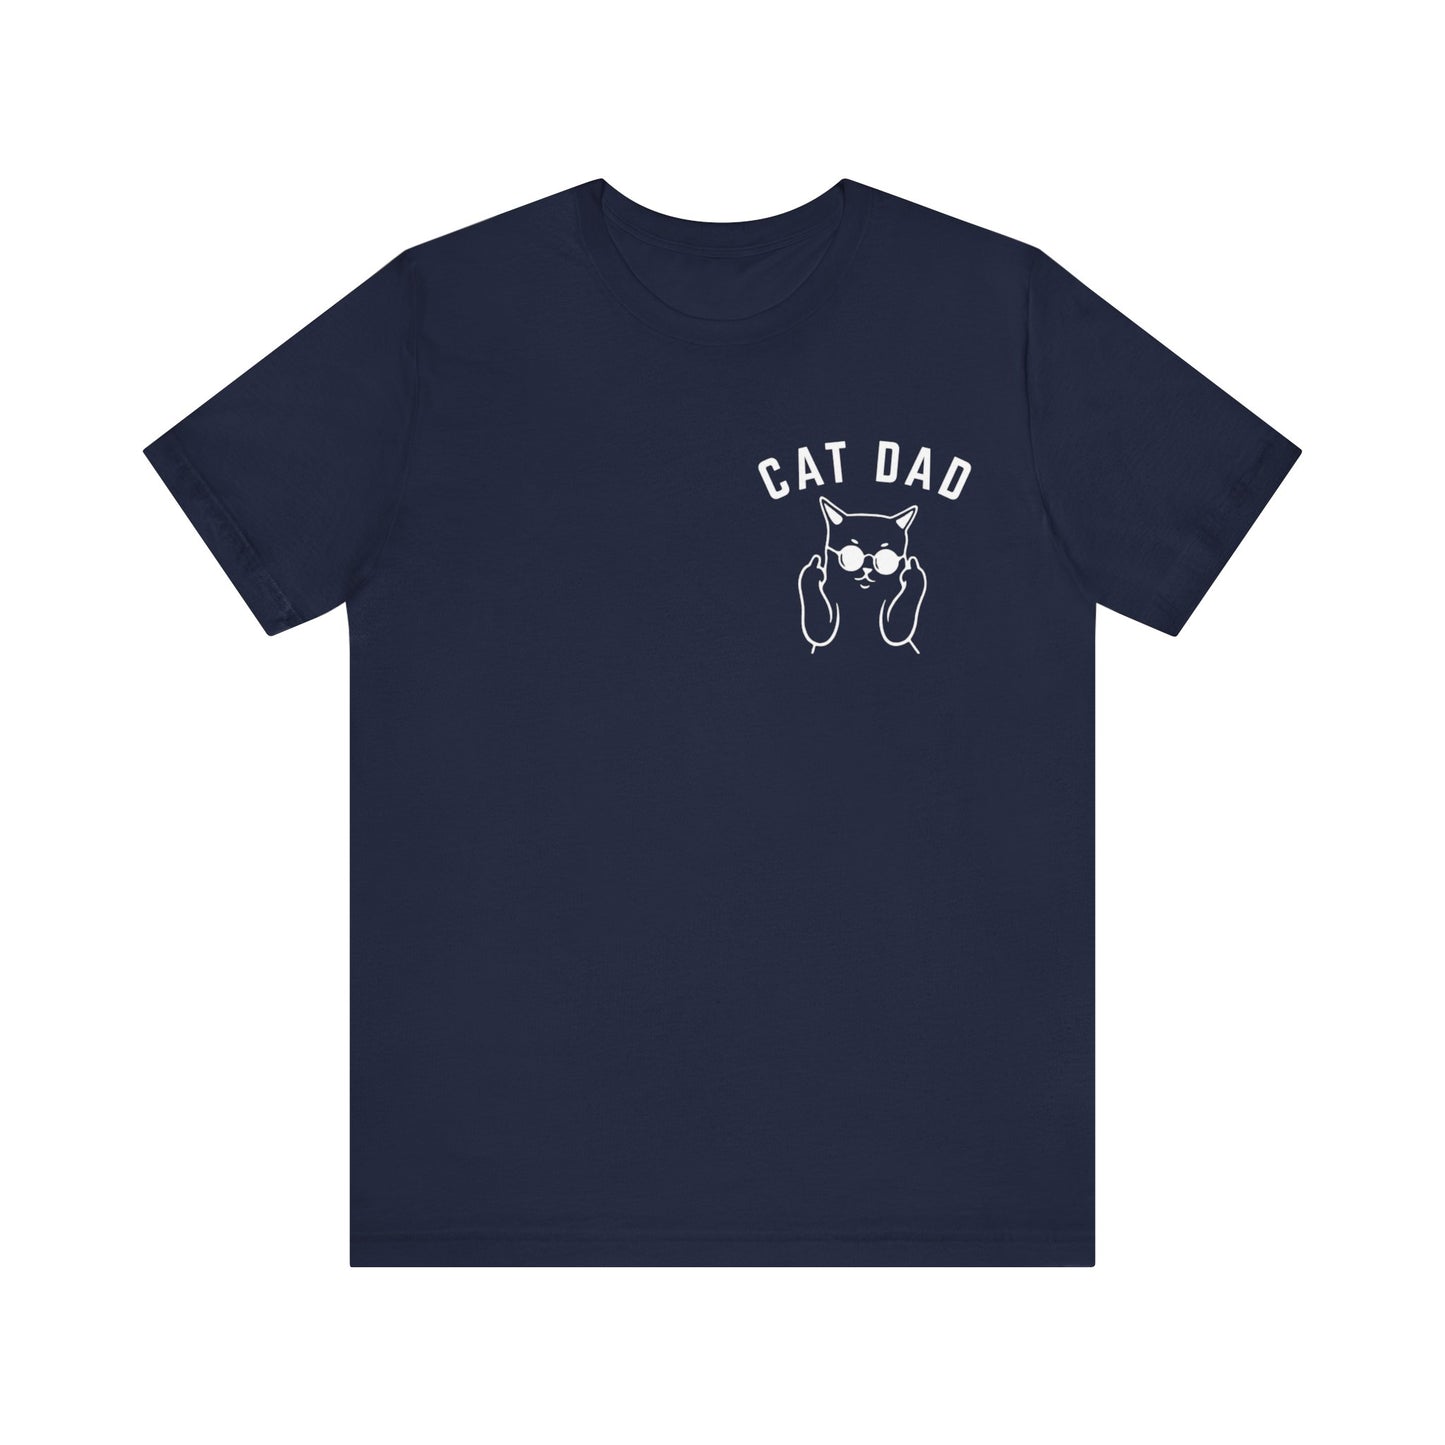 Cat Dad Shirt, Cat Lover Shirt, Funny Cat Tee, Cat Father, Cat Daddy Shirt, Animal Lover Gift, Gift from the Cat, Cat Dad Gift, T1110